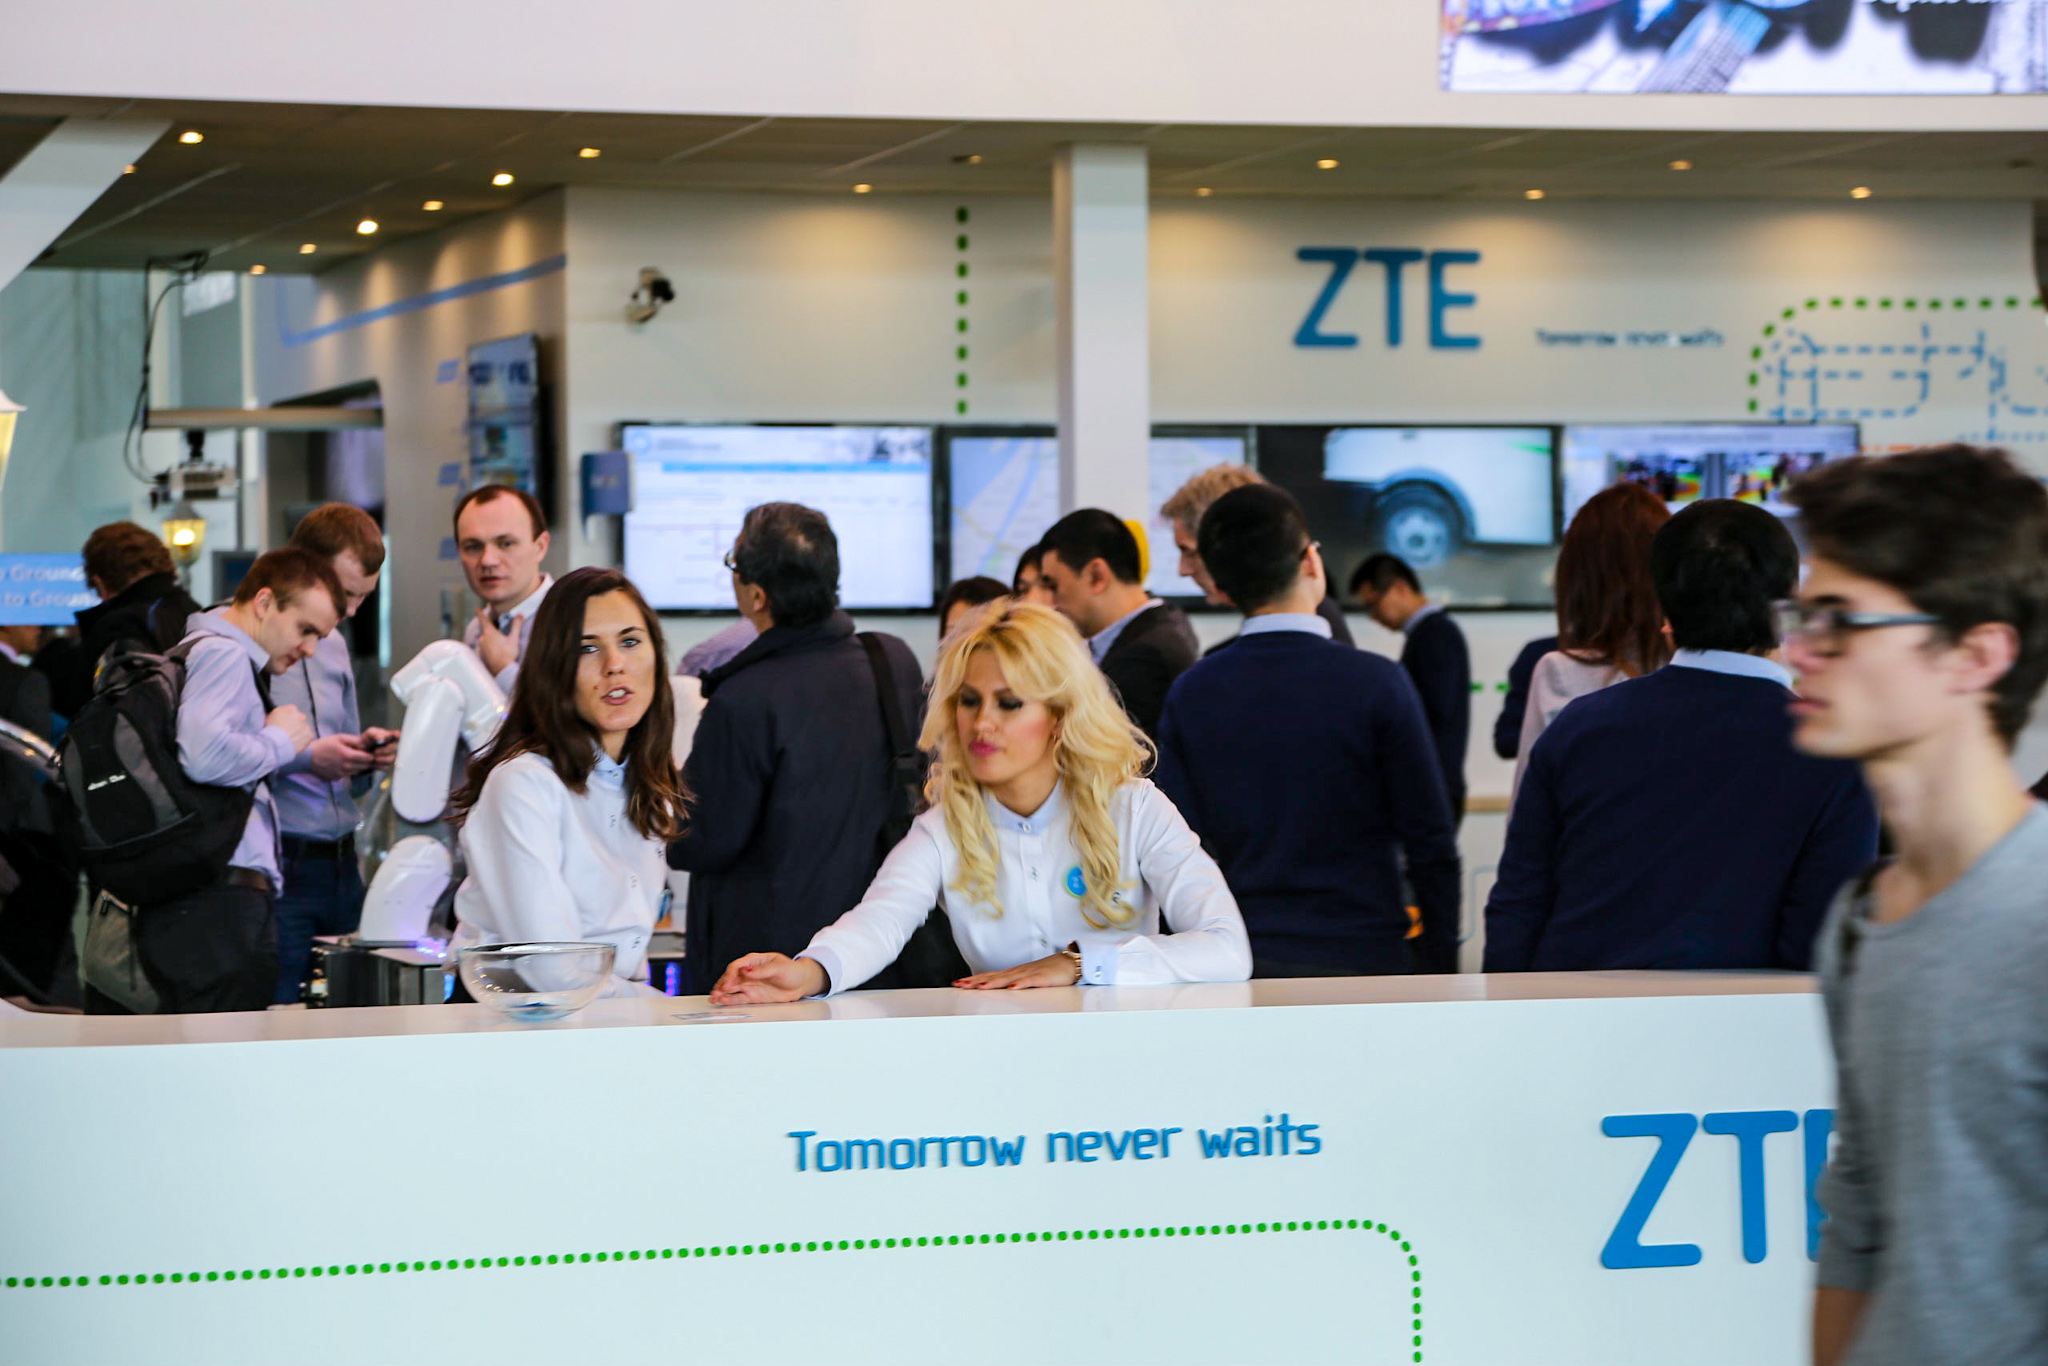 ZTE’s slogan: Tomorrow never waits. Tomorrow may never come to ZTE in the light of new US measures to mitigate China’s high tech influence.